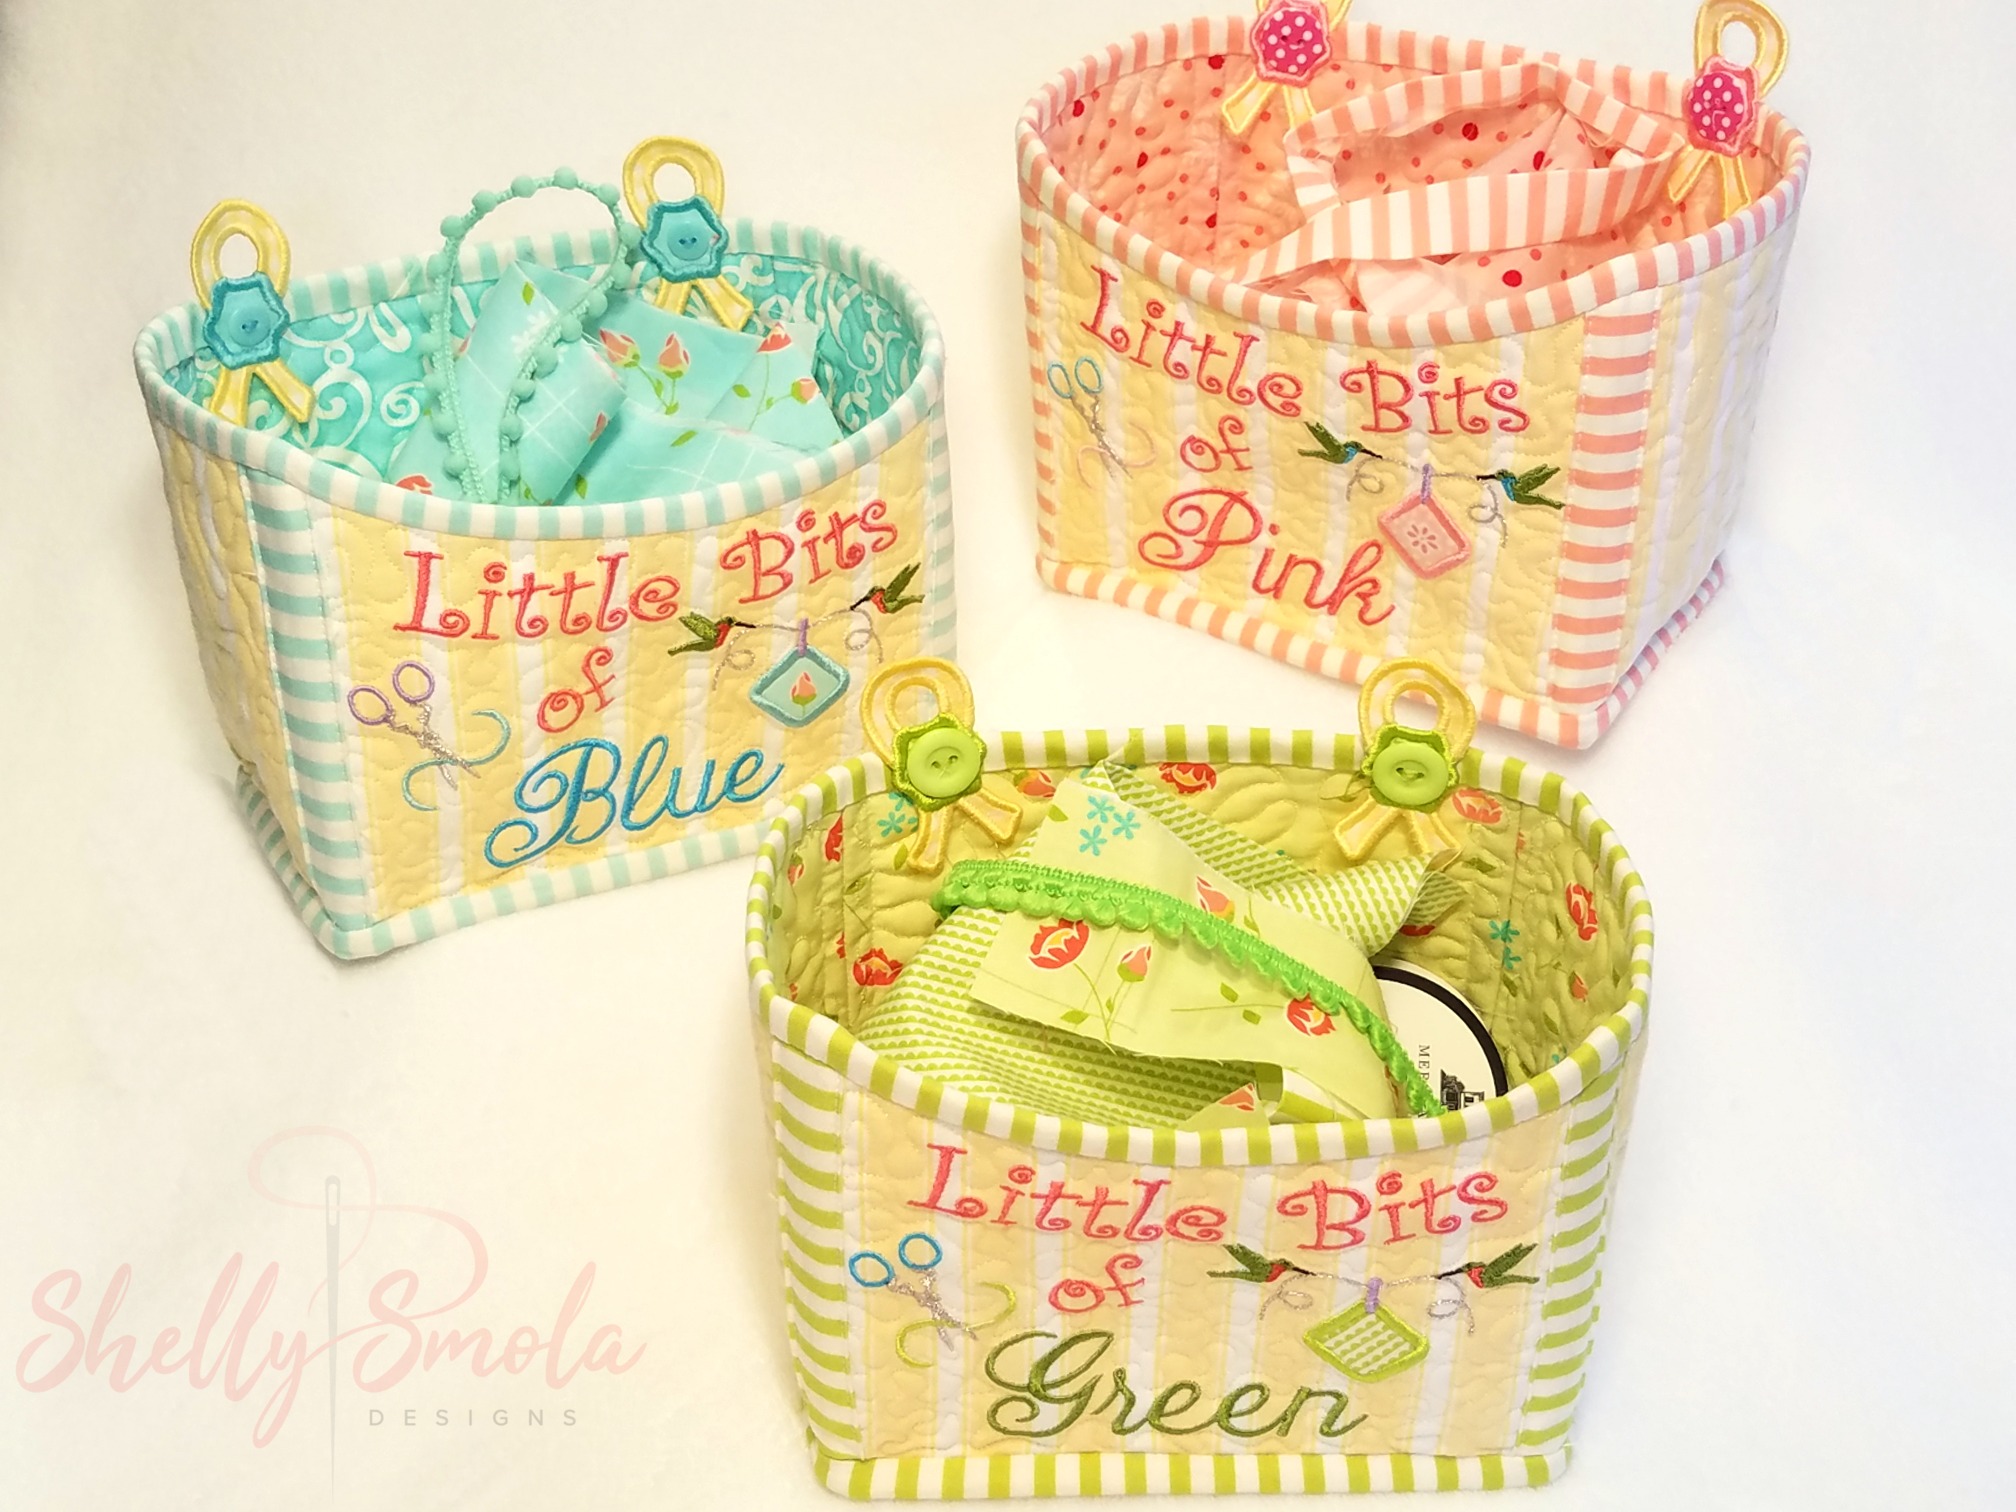 Little Bits by Shelly Smola